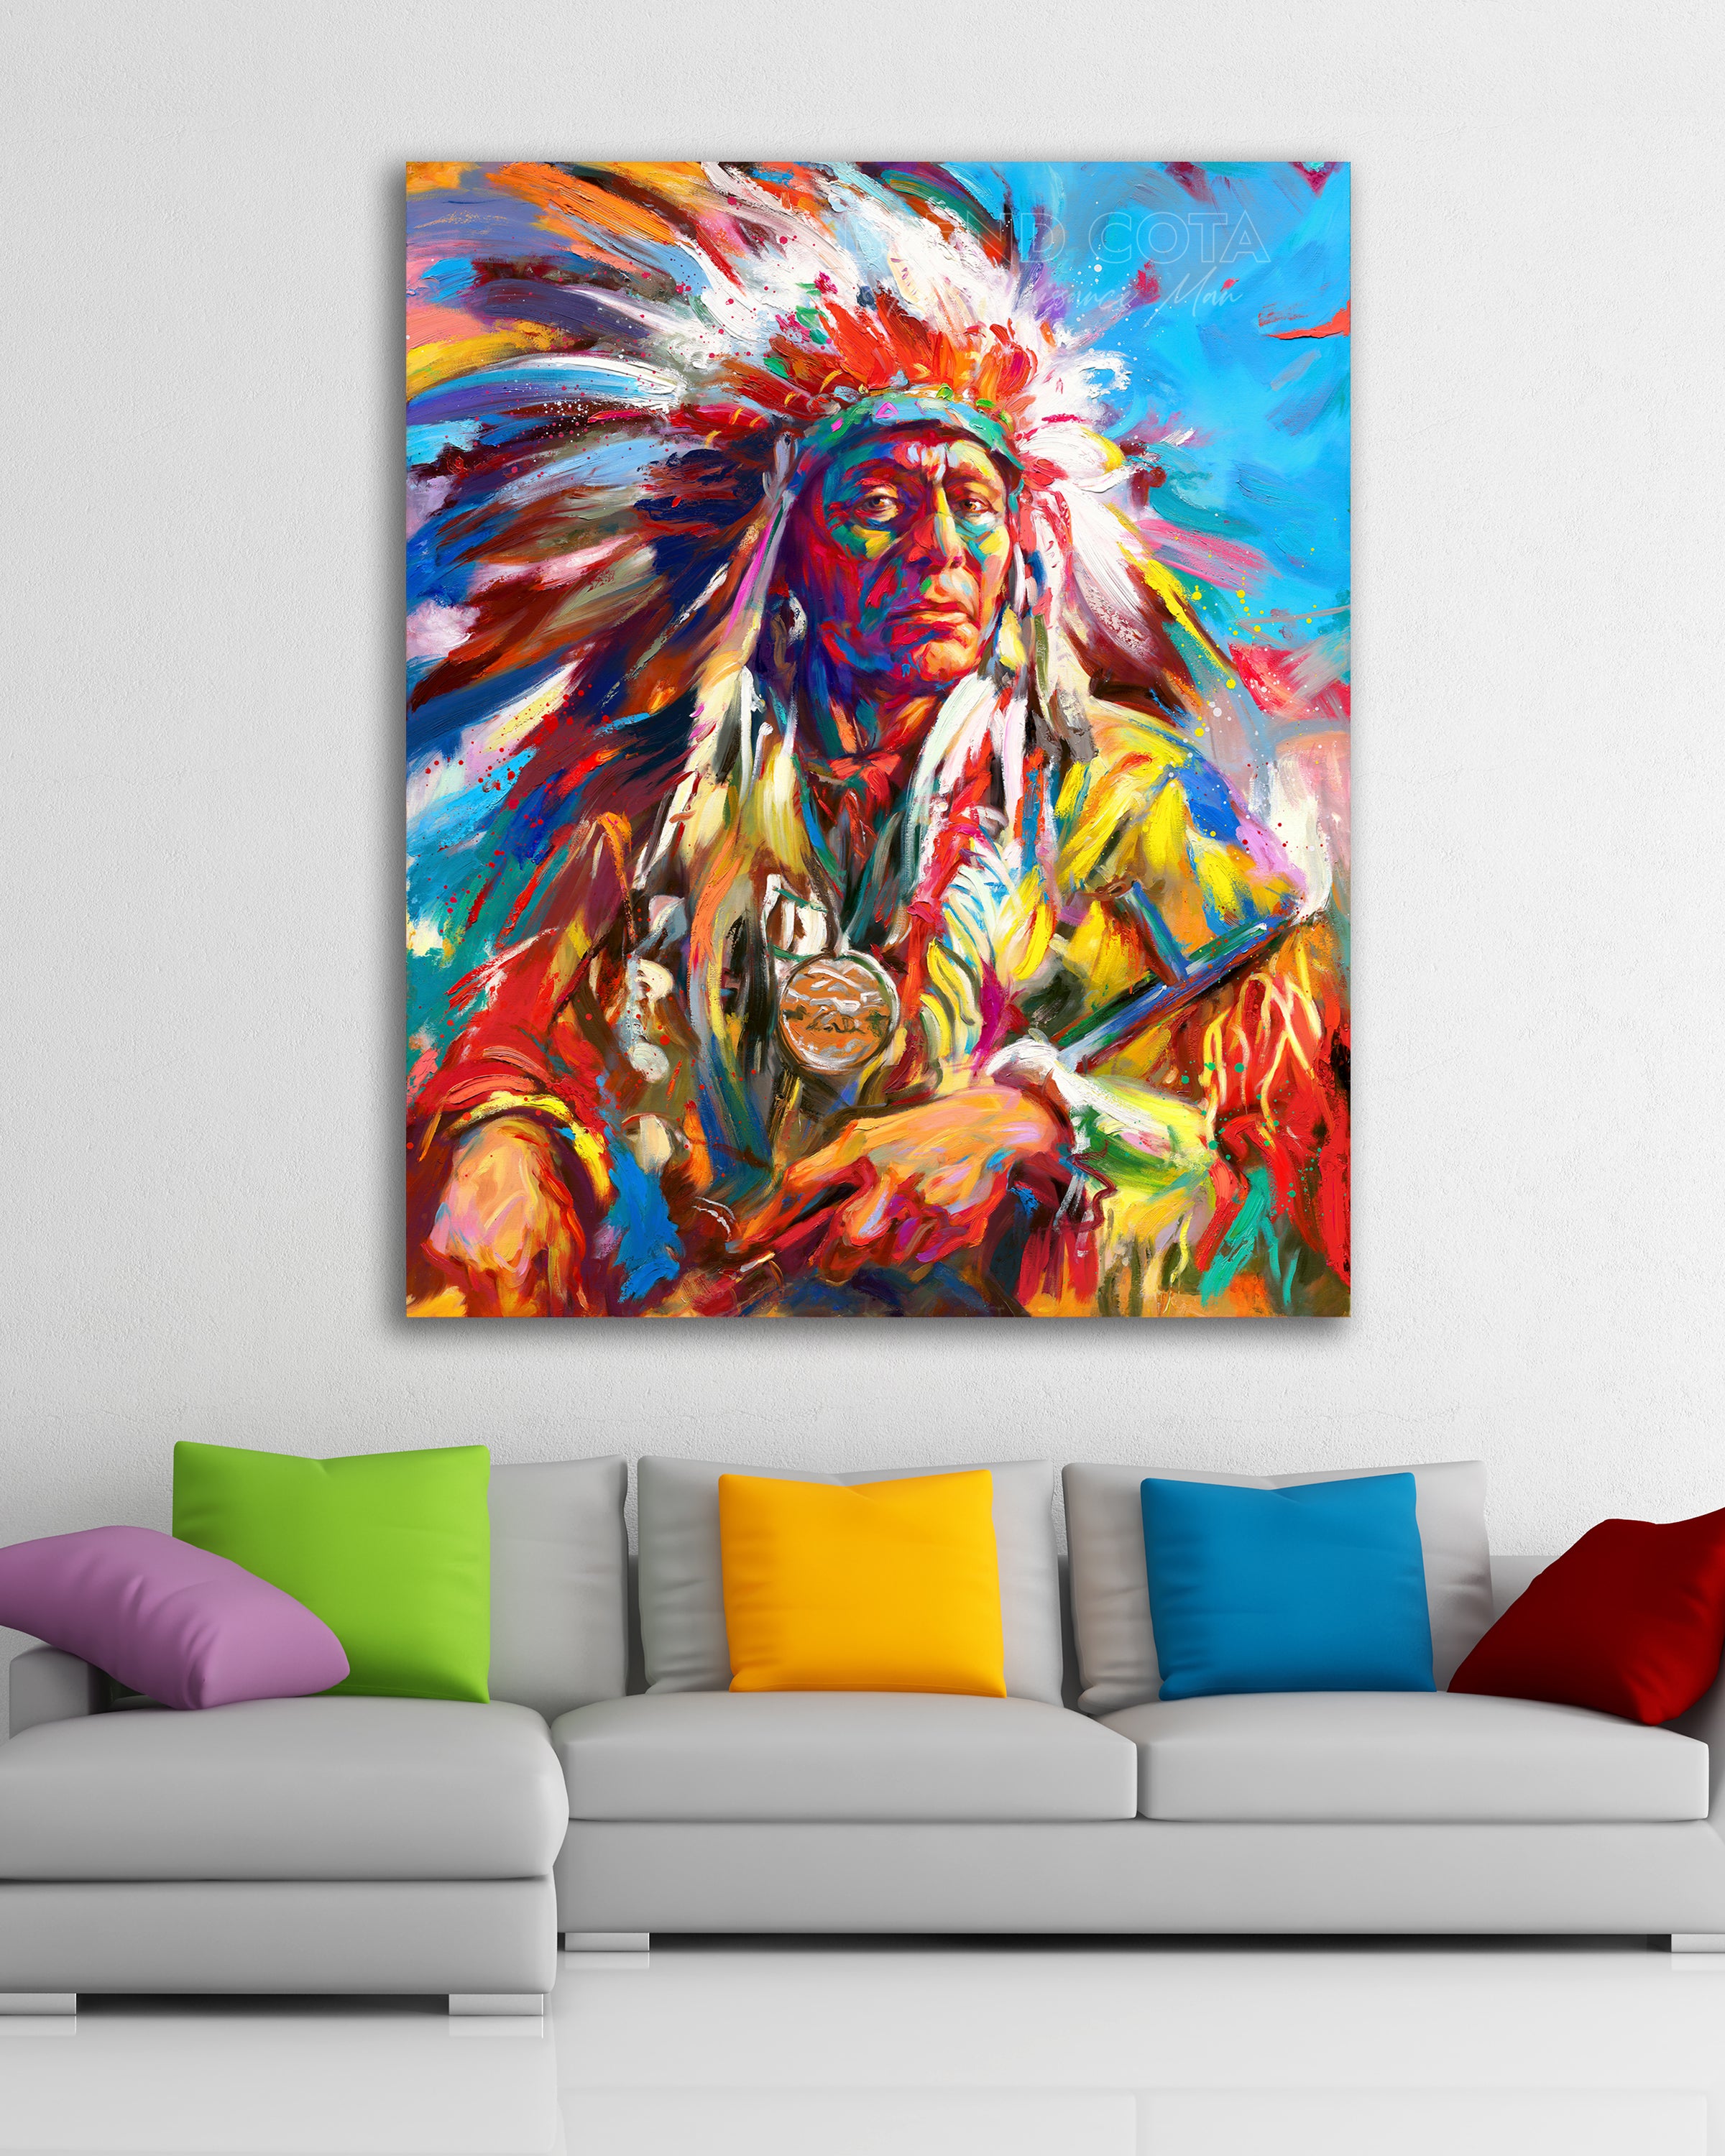 Oil on canvas original painting of the Native American Warrier Portrait in war bonnet, symoblizing the Great Spirit, pride and power, in colorful brushstrokes, color expressionism style.